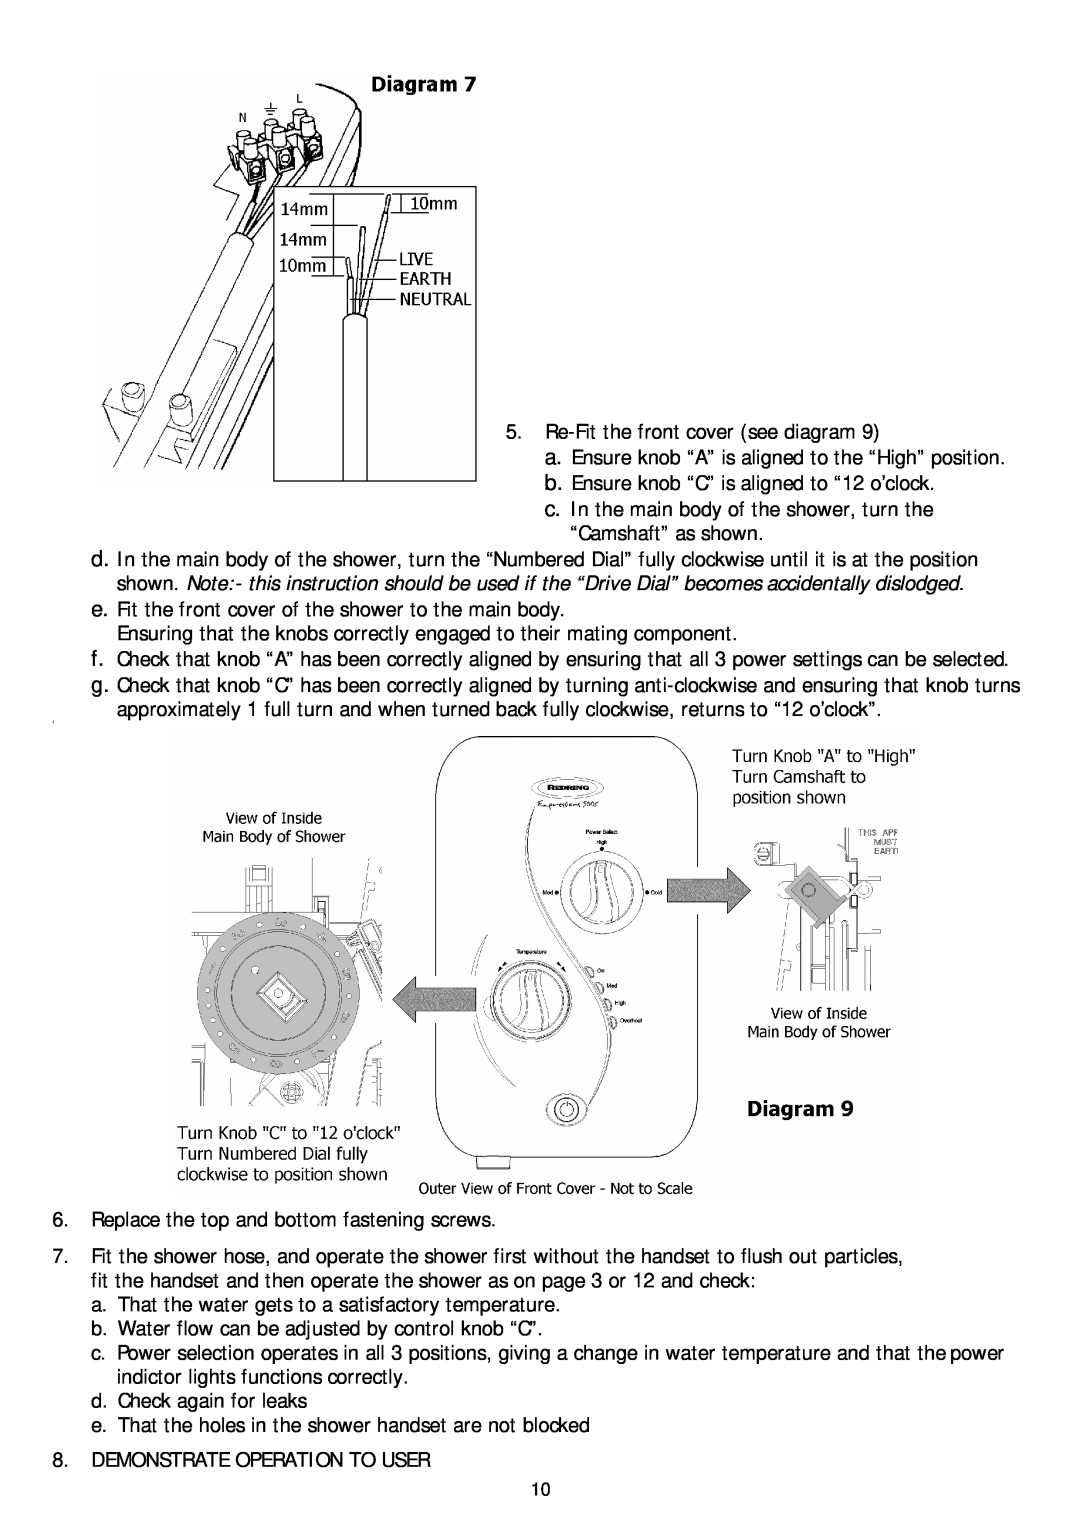 Redring 500S manual Re-Fitthe front cover see diagram 